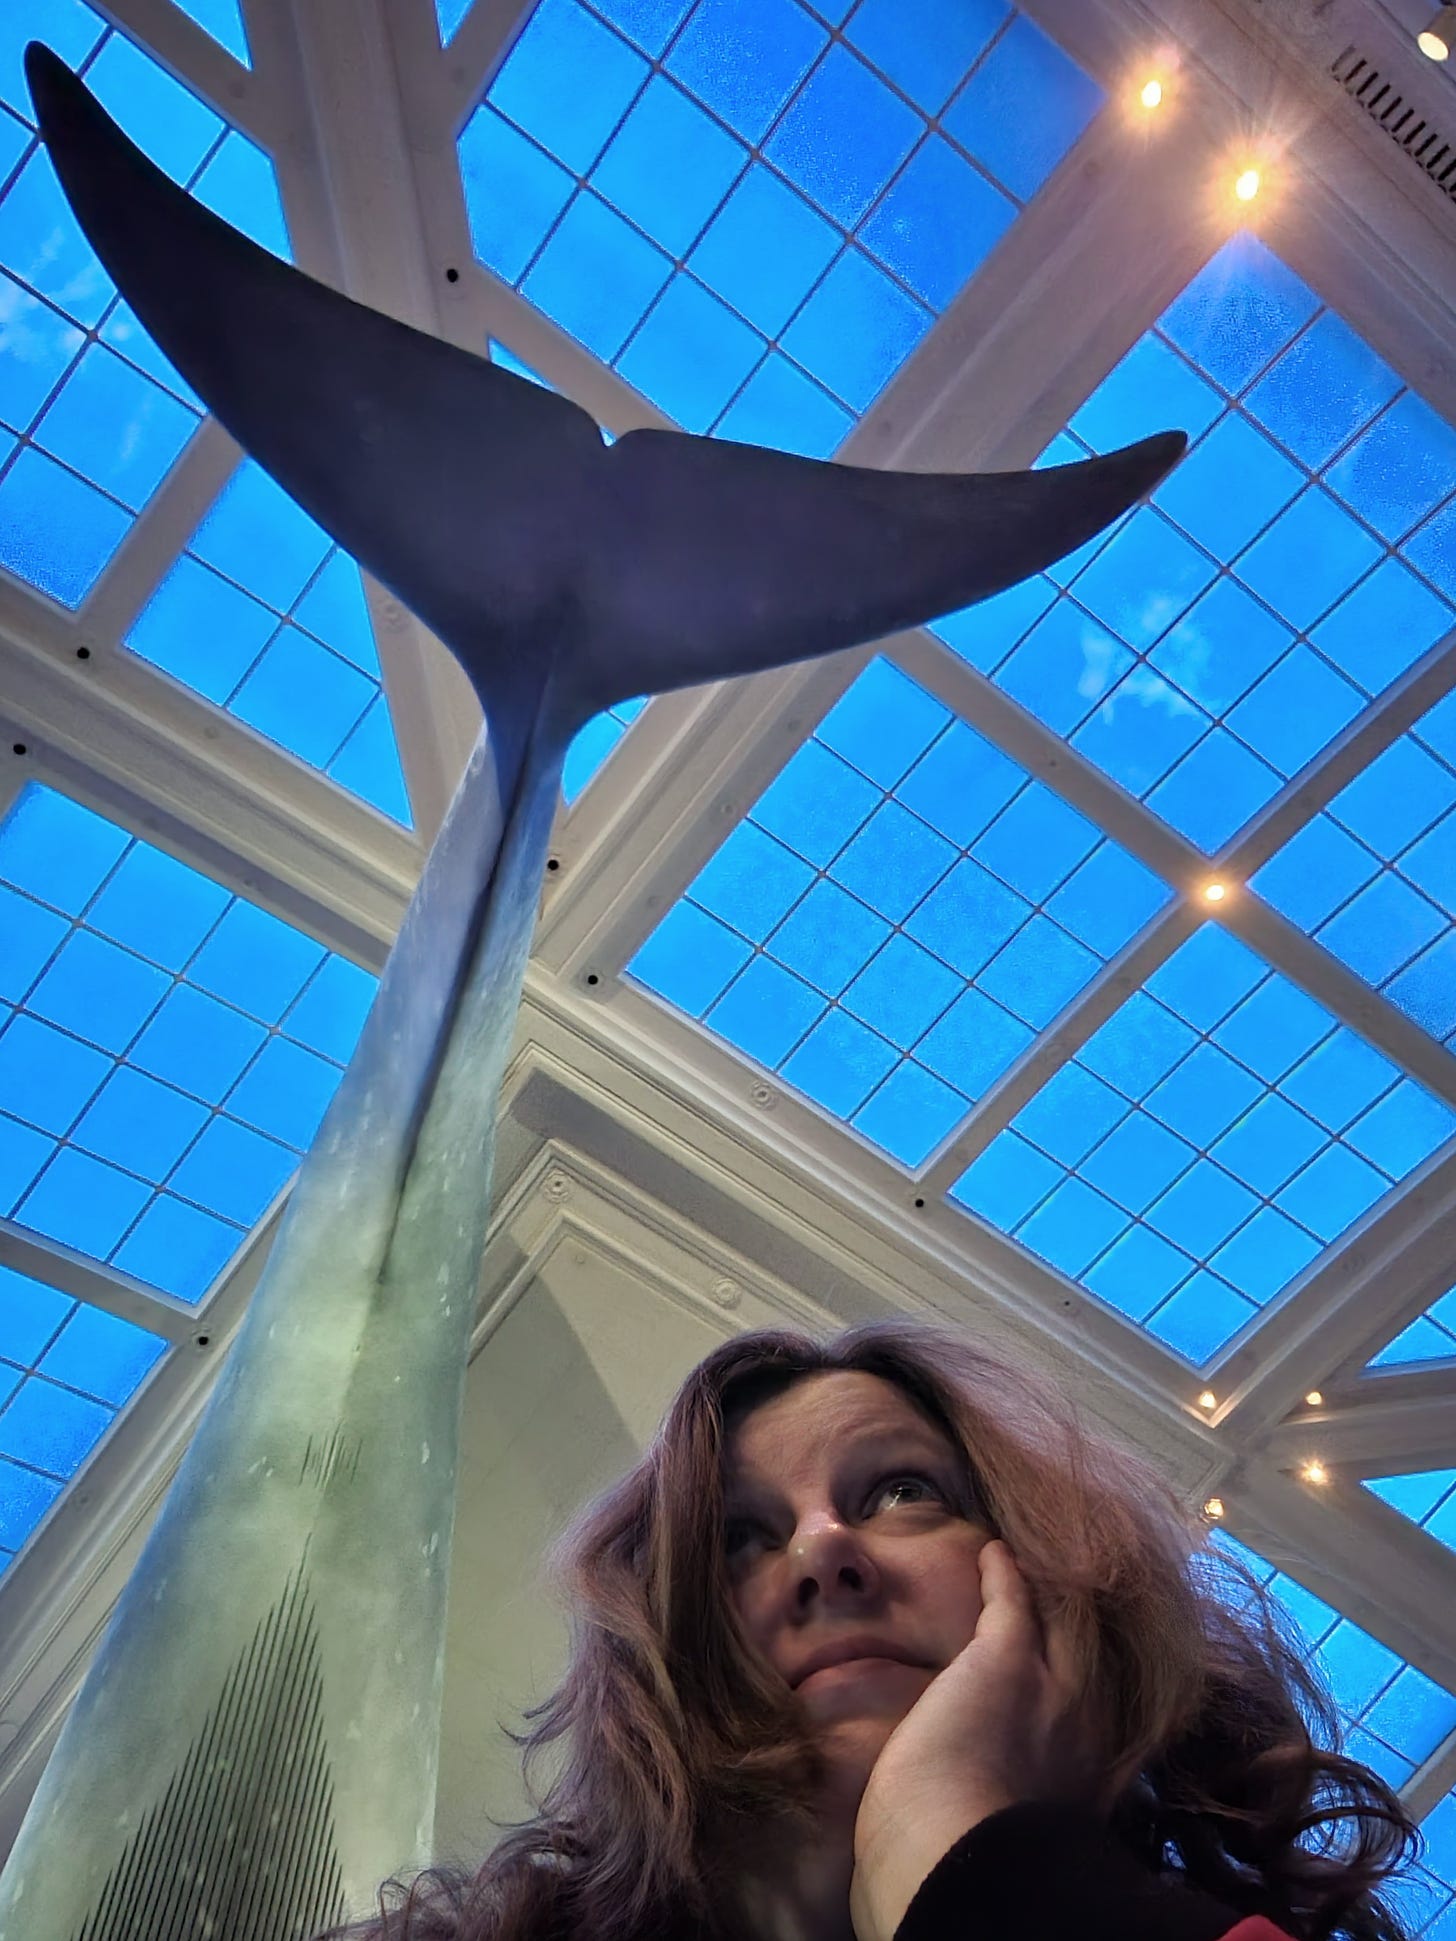 Cathy sits under a life-size model of a blue whale and looks up with a bemused expression that exposes how small she feels in comparison. 